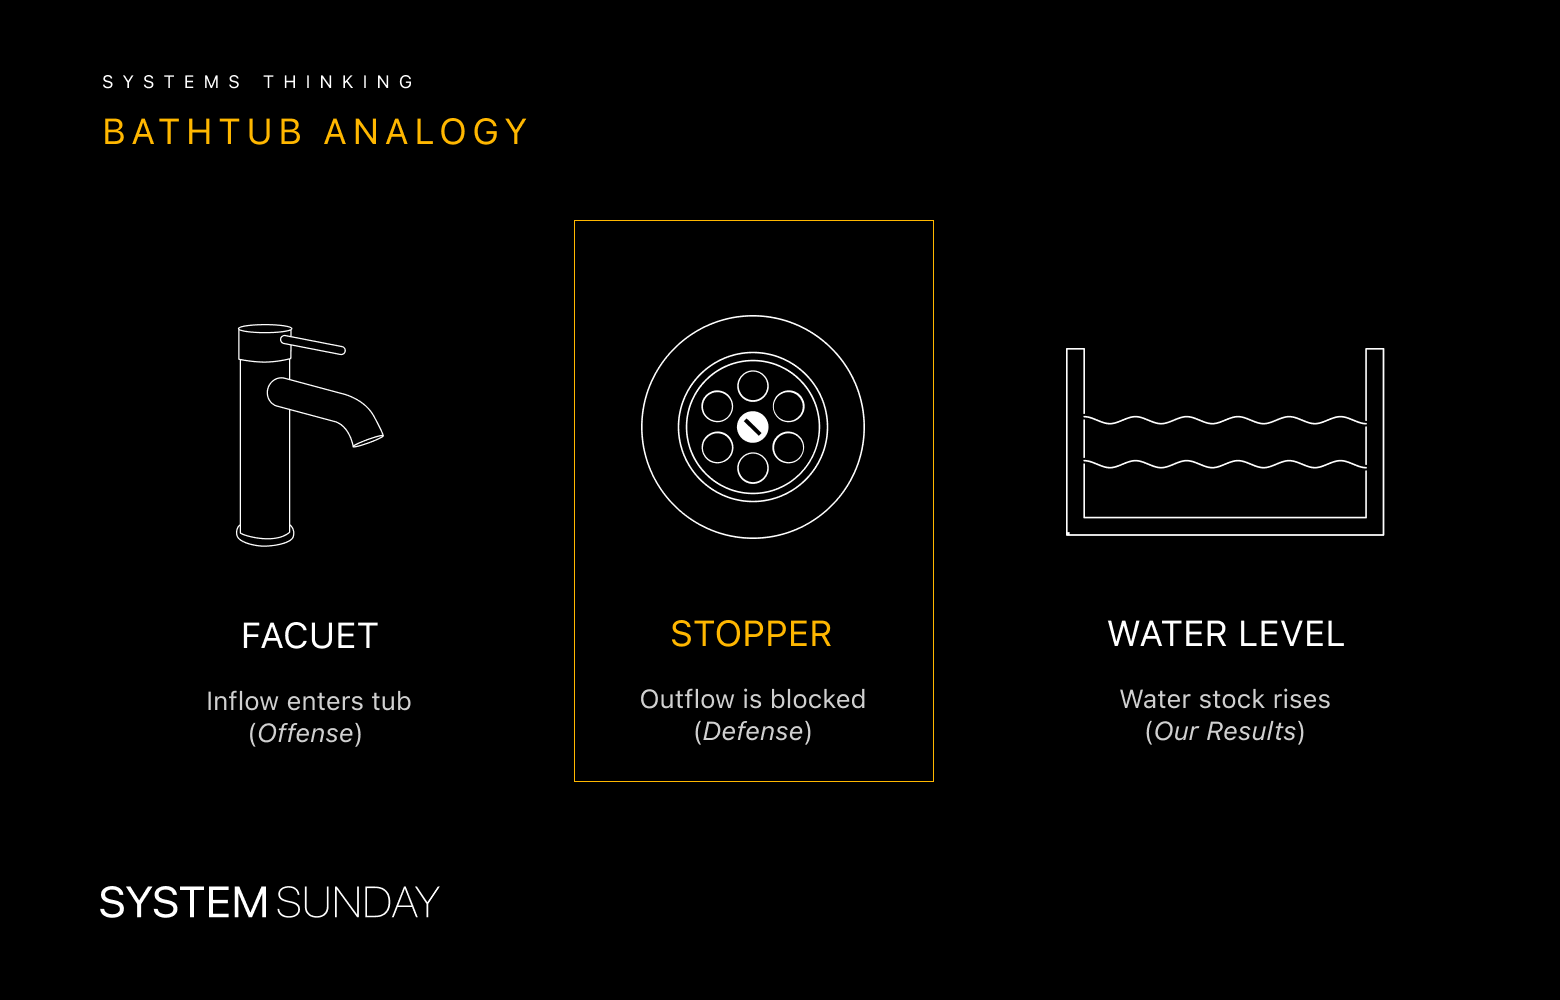 Bathtub analogy: faucet, stopper, and water level